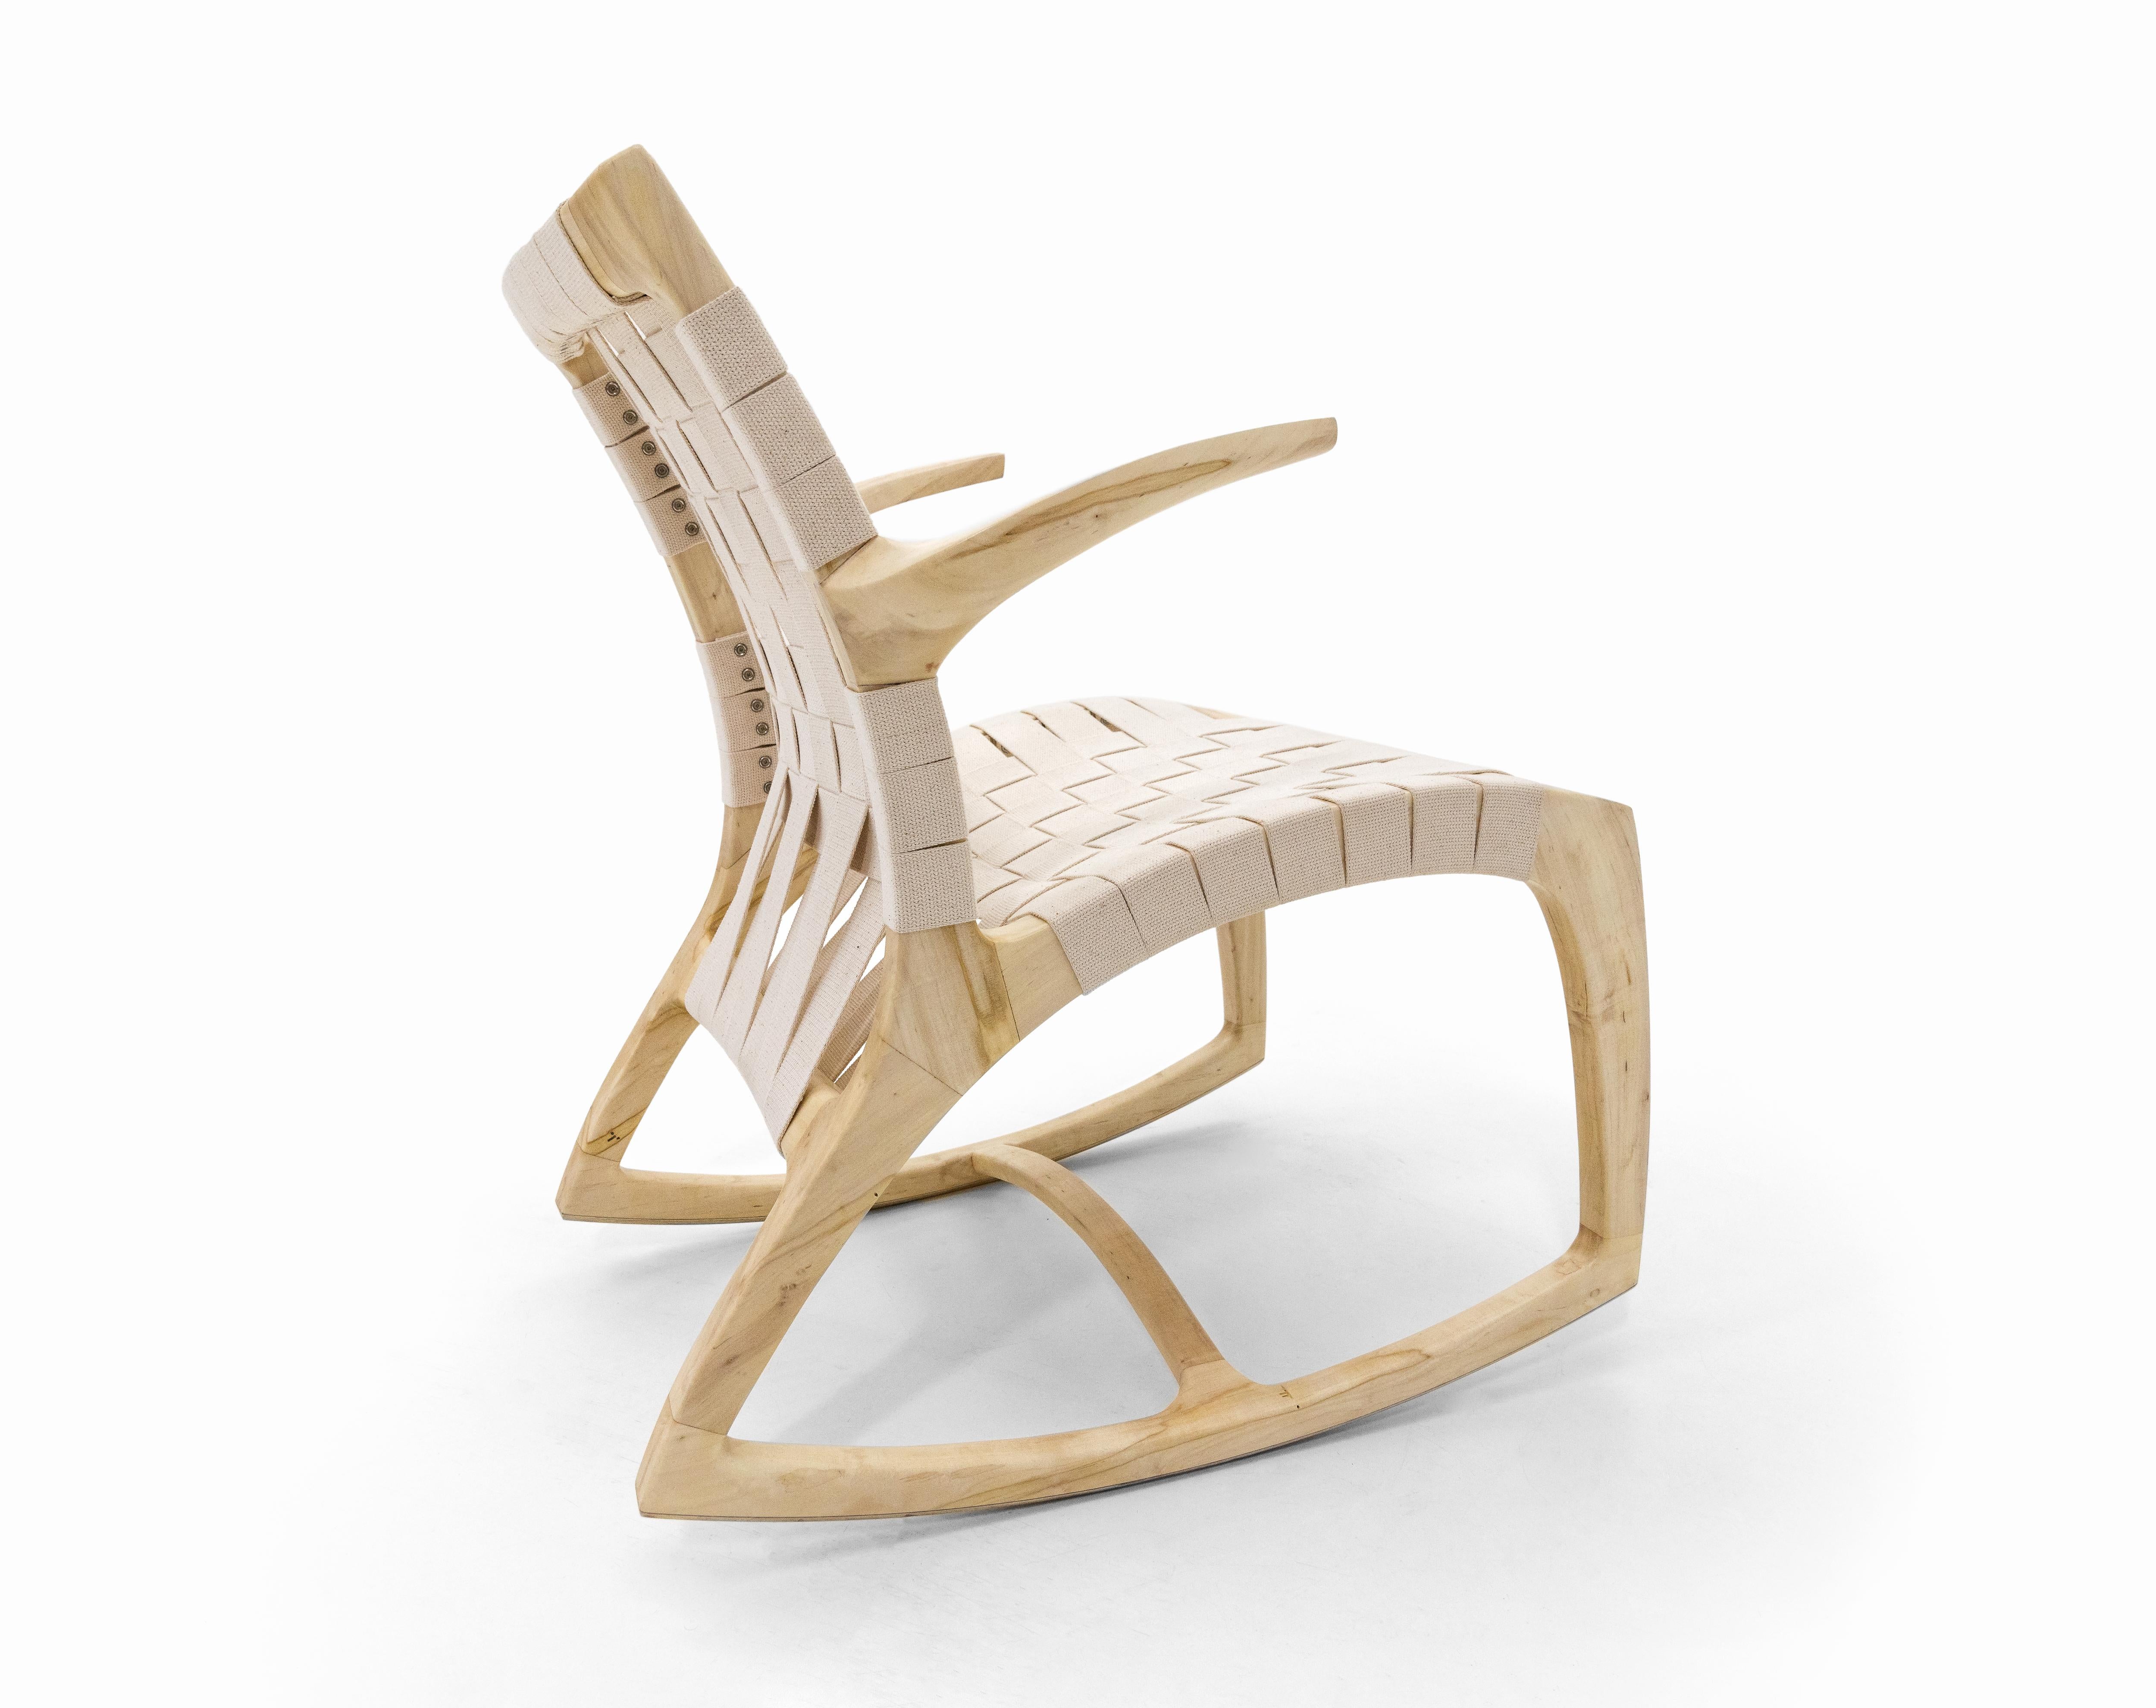 Rocking chairs have been a focus of furniture designers for centuries, quite simply because they are difficult to make. Here’s one where comfort and design meet right in the middle. The Luna Rocker was designed by Martin Goebel in 2013. Heavily